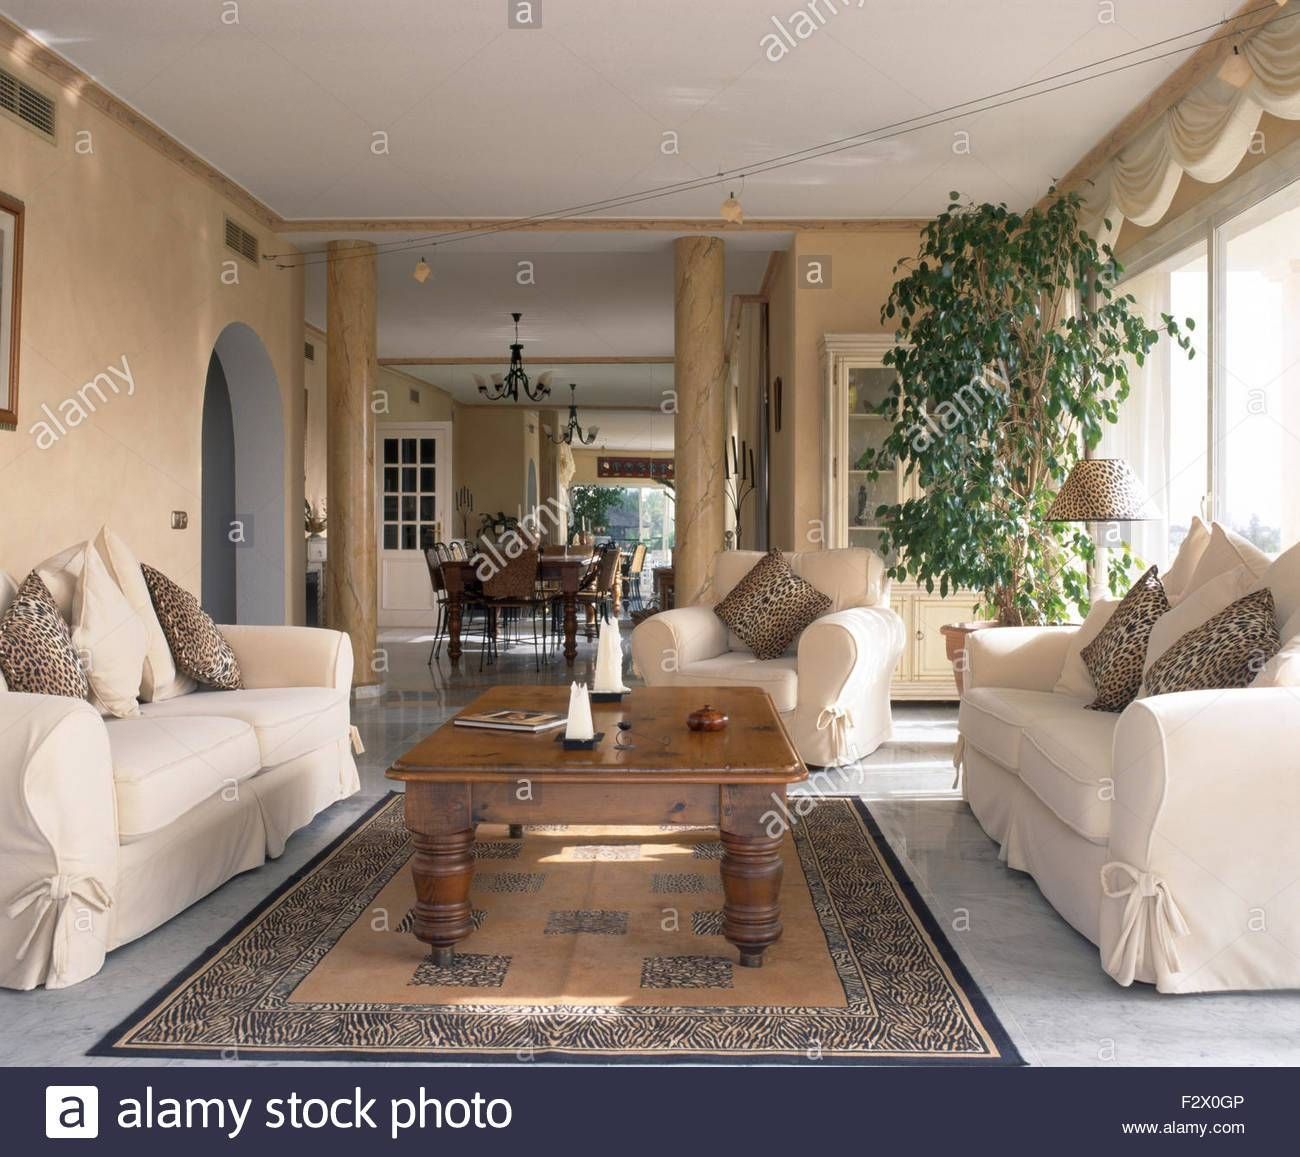 Loose Covers Stock Photos & Loose Covers Stock Images – Alamy Regarding Covers For Sofas (View 27 of 30)